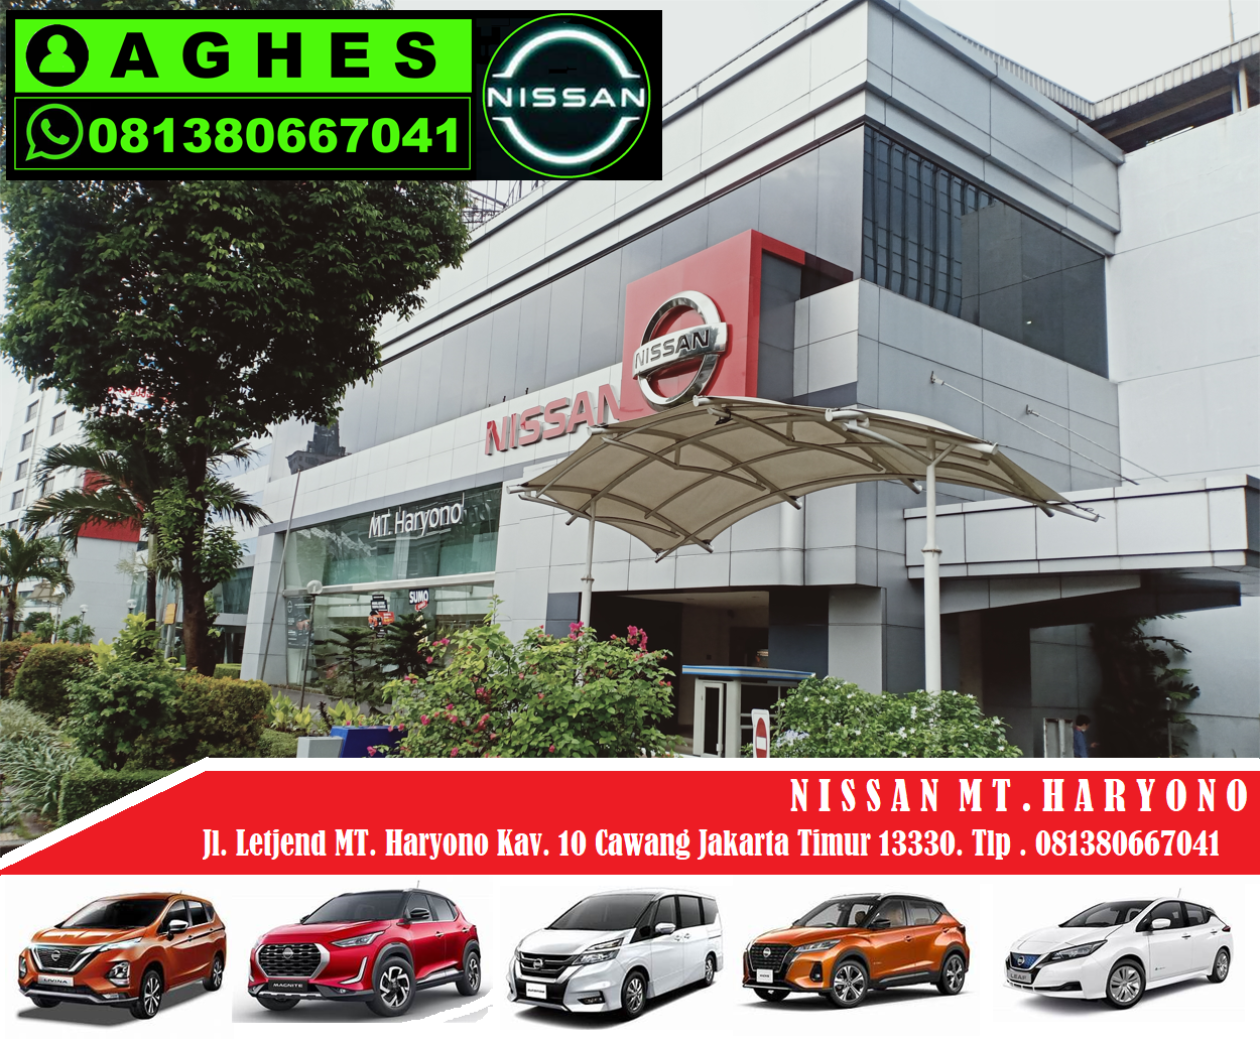 Nissan MT Haryono (Head Office) AGHES          ☎ 081380667041